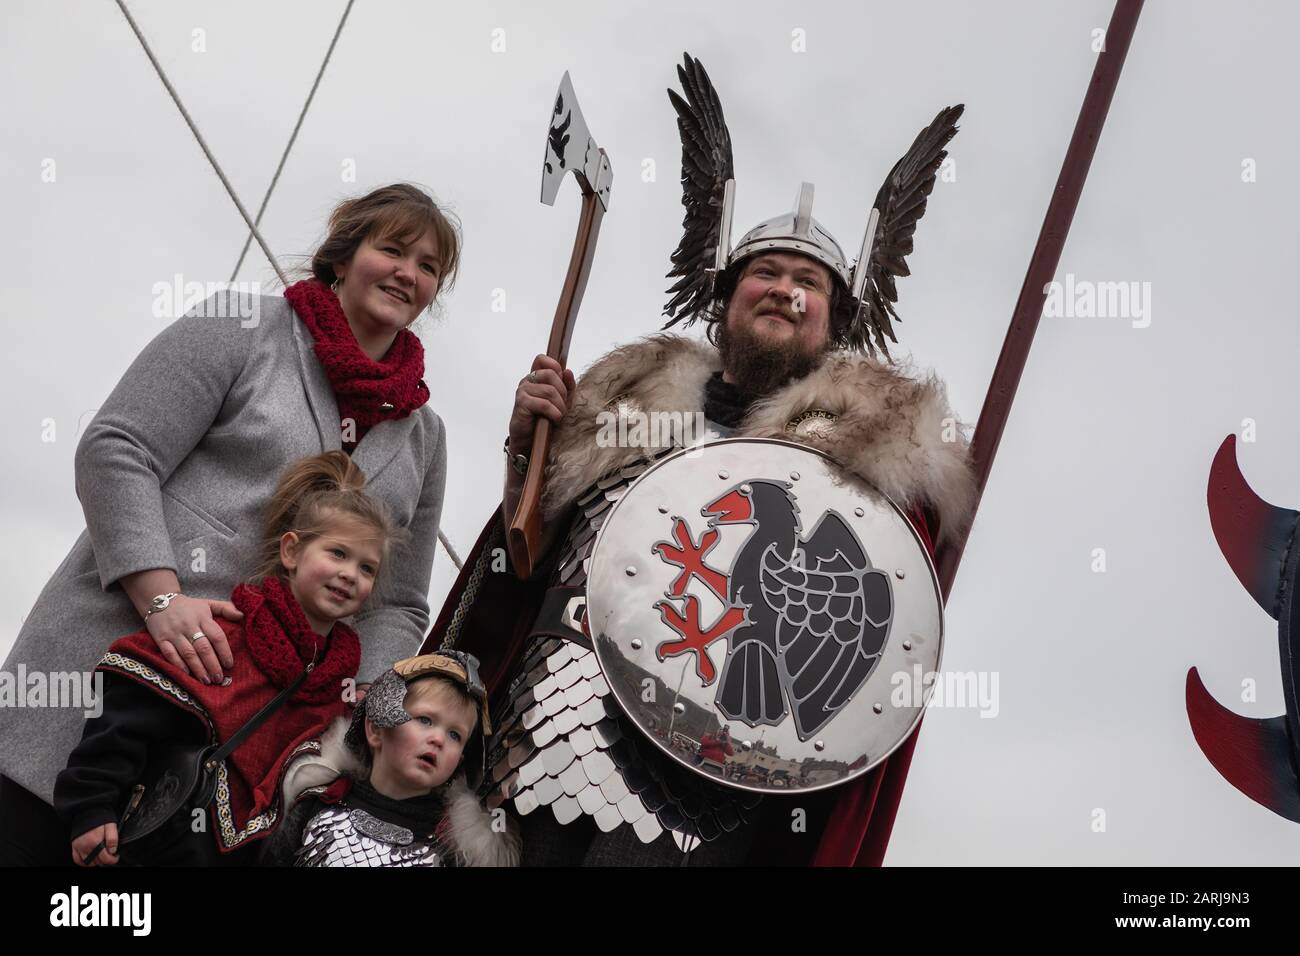 Lerwick, Shetland Isles, Scotland, UK. 28th January 2020. Up Helly Aa 2020 Guizer Jarl Liam Summers, and family, aboard the galley ship of the viking Stock Photo